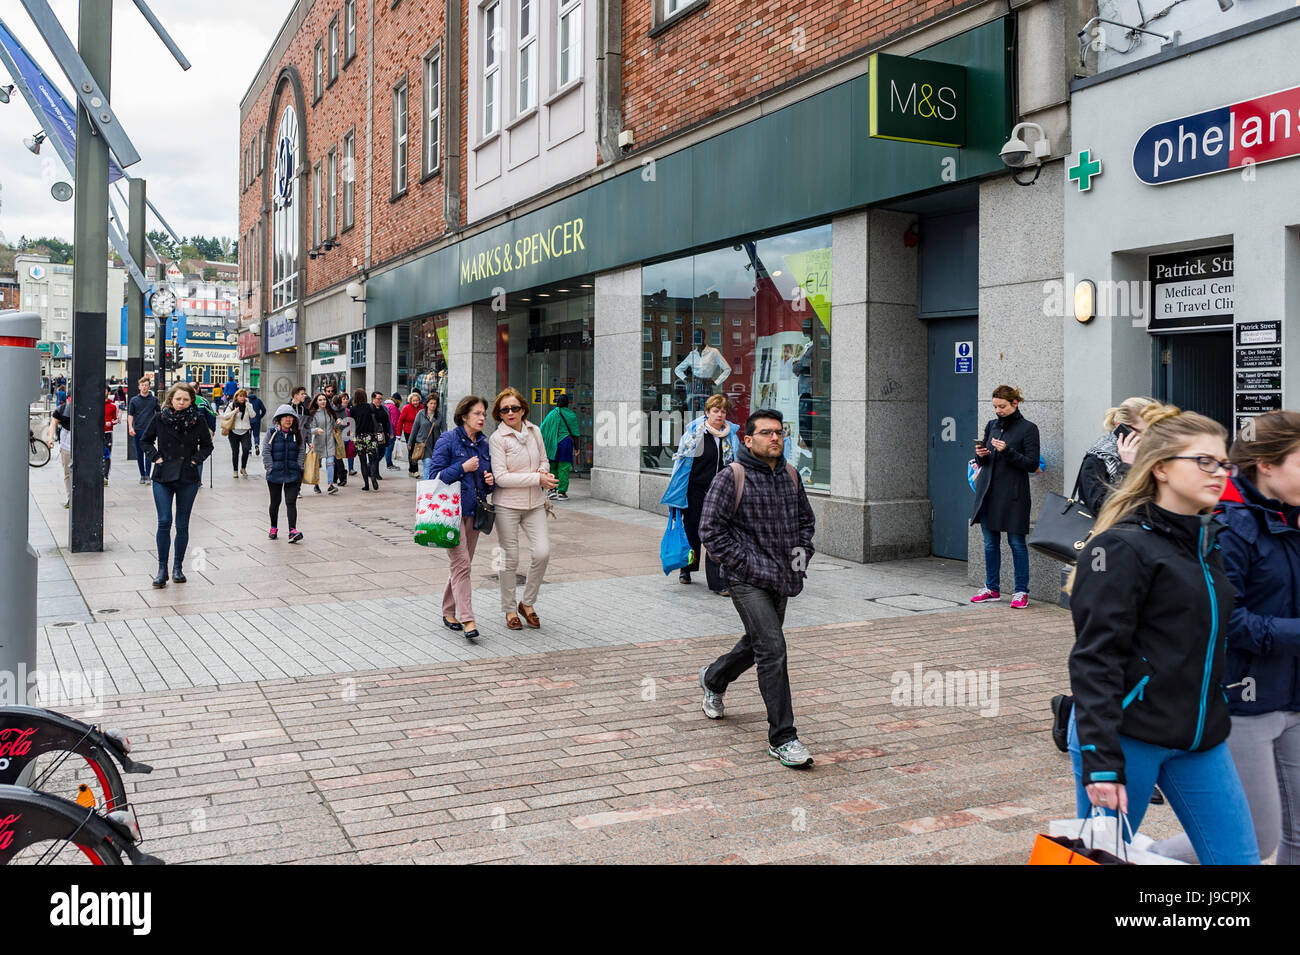 Marks and Spencer M&S with shoppers pedestrians on Patrick Street, Cork, Ireland Stock Photo